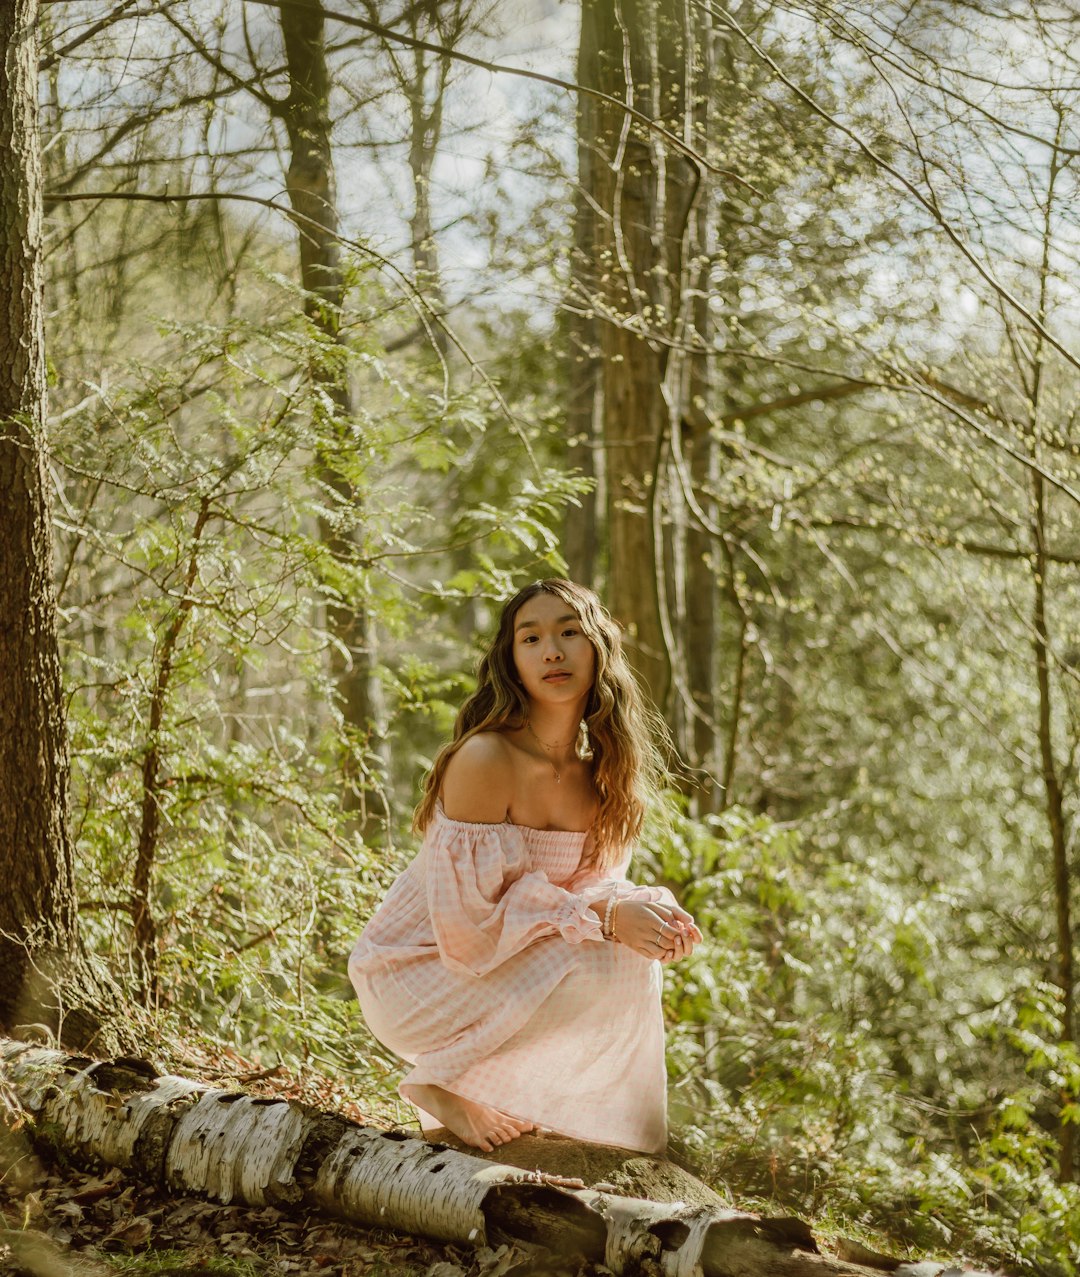 woman in white dress standing in forest during daytime